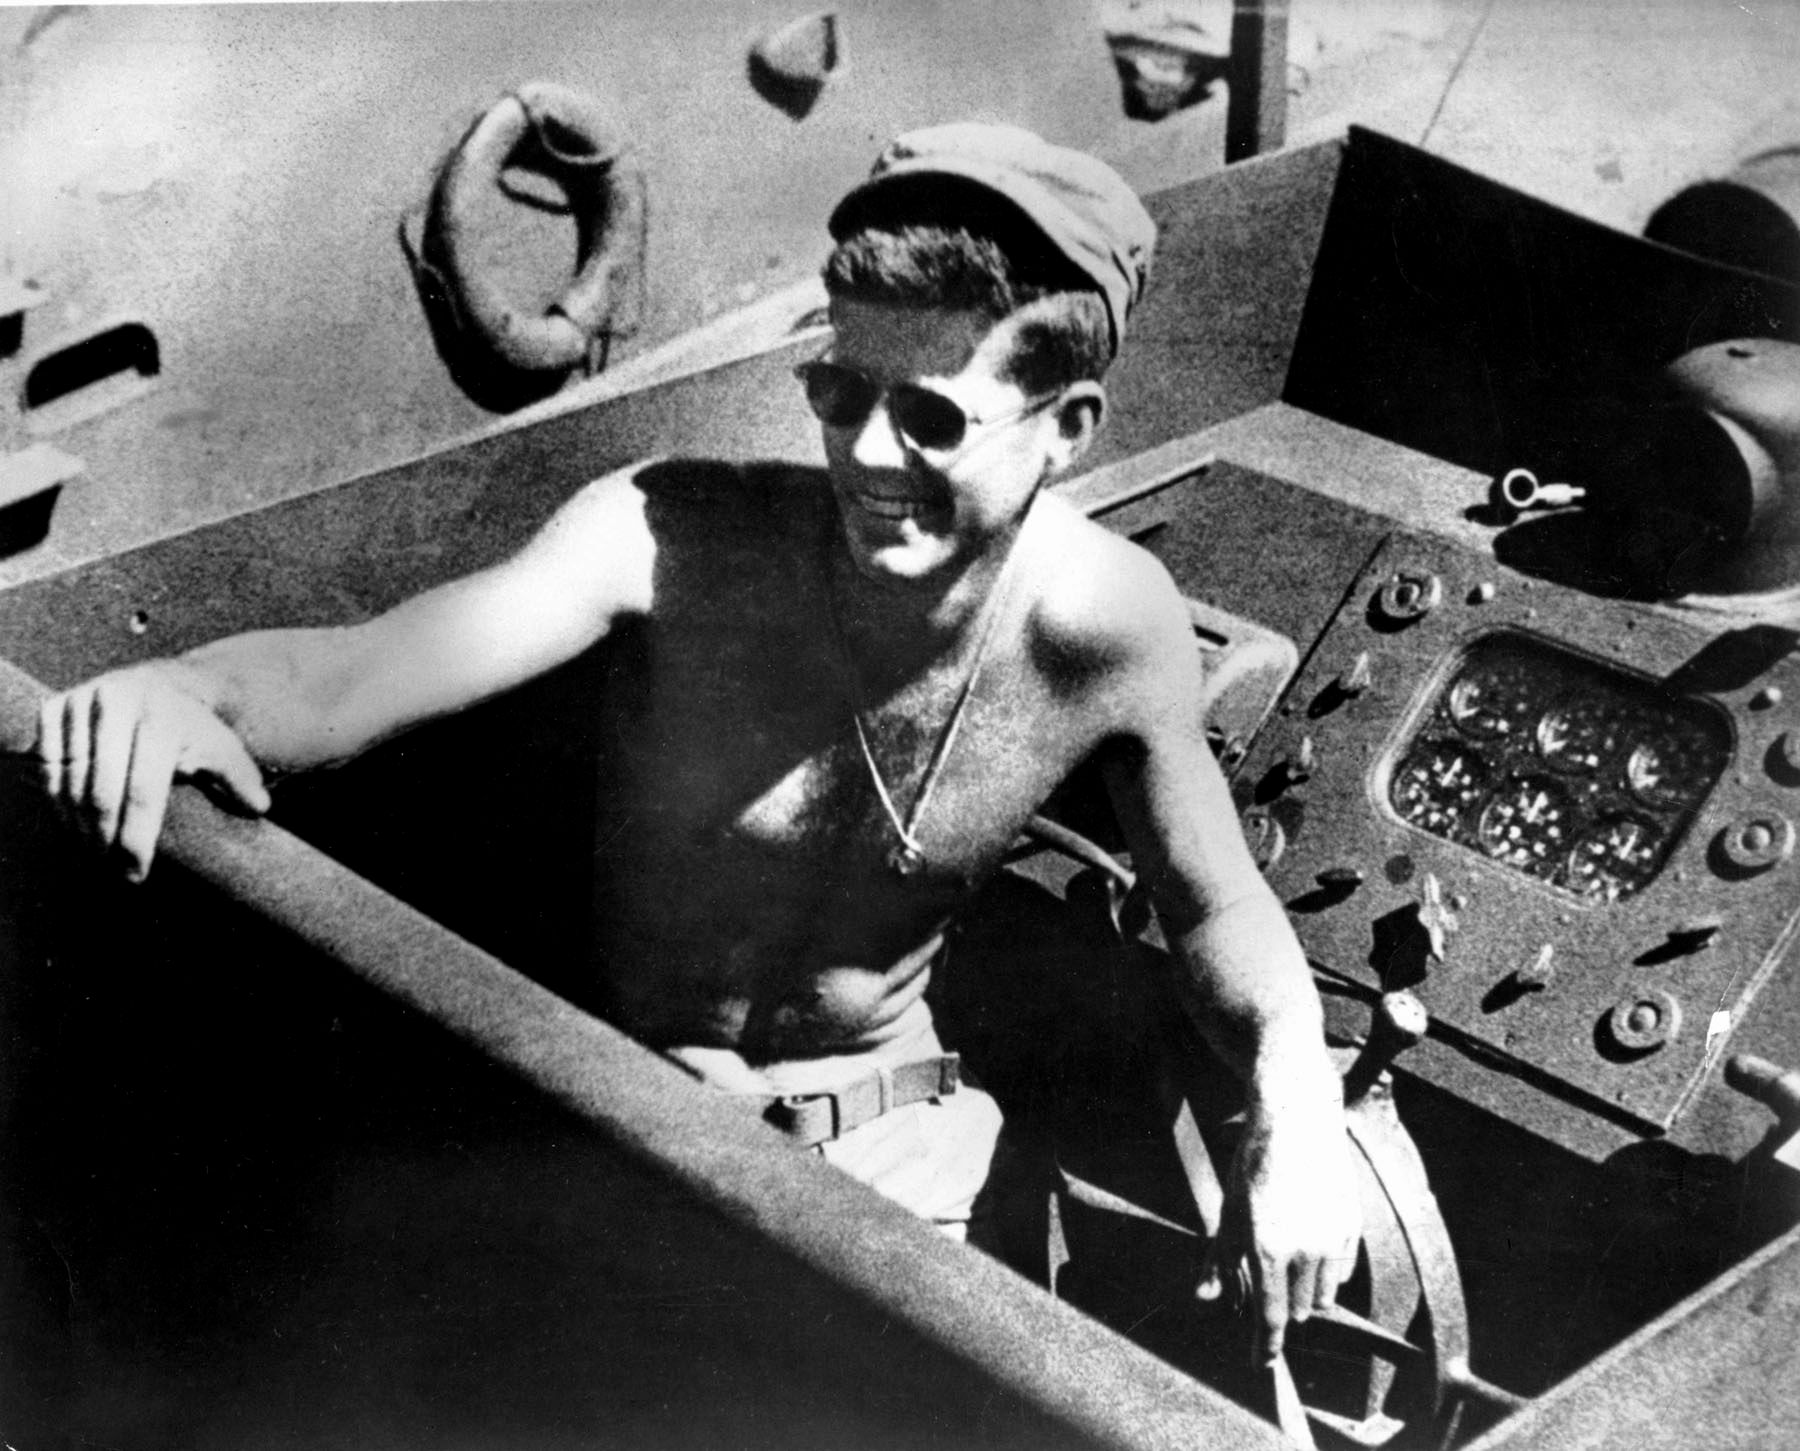 This iconic photo of Lieutenant (j.g.) John F. Kennedy was taken aboard PT-109 near the island of Tulagi in the Solomons in 1943. Kennedy displayed great leadership and command presence after PT-109 was sunk.